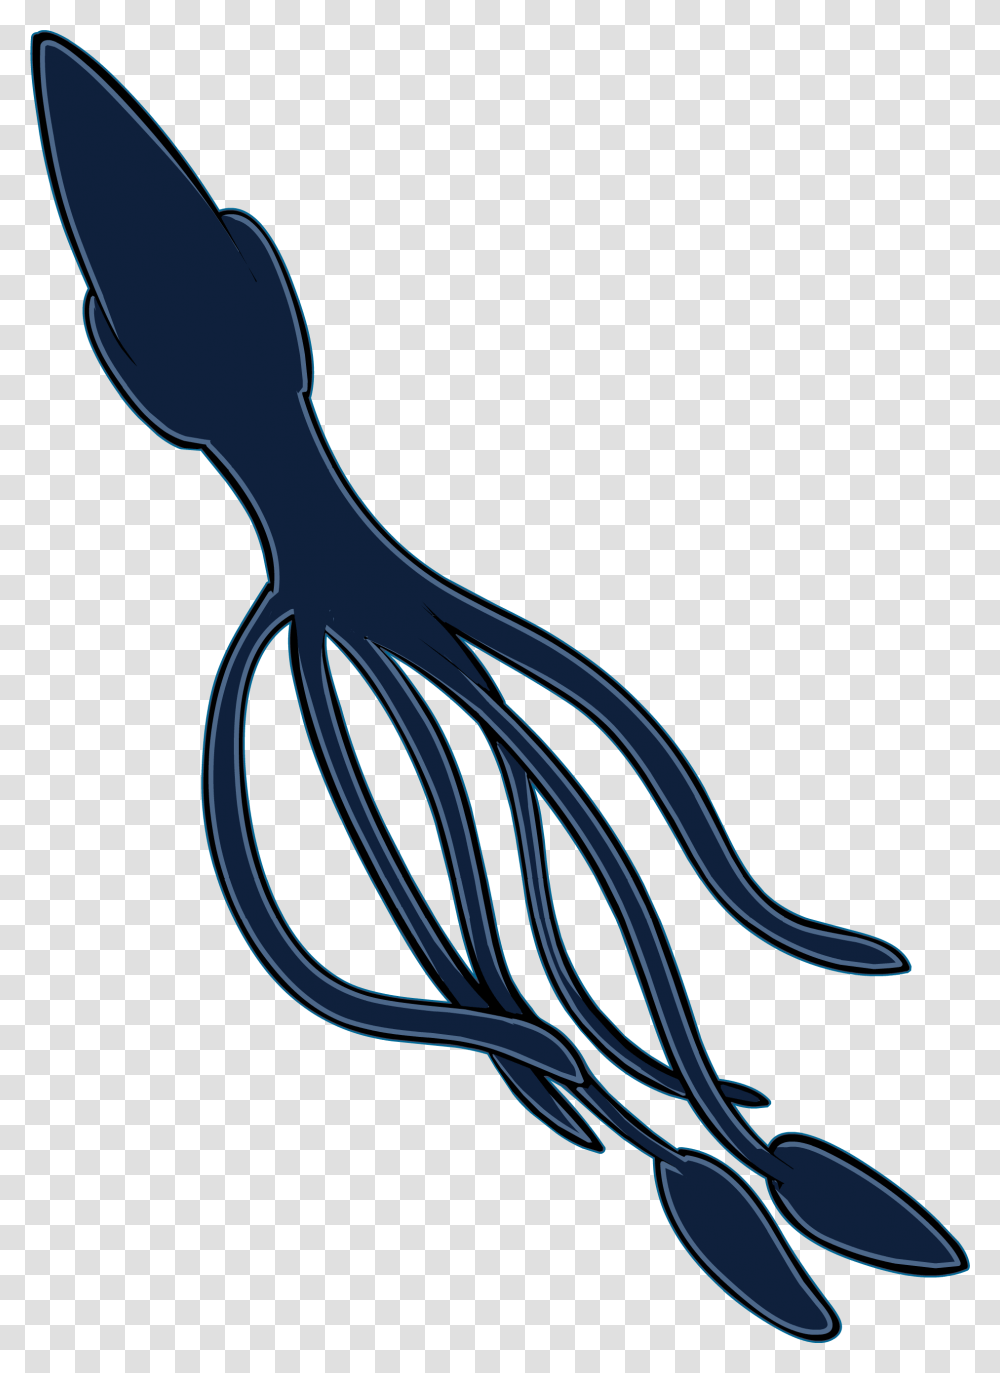 Illustration Download Giant Squid Background, Appliance, Spoon, Cutlery, Mixer Transparent Png